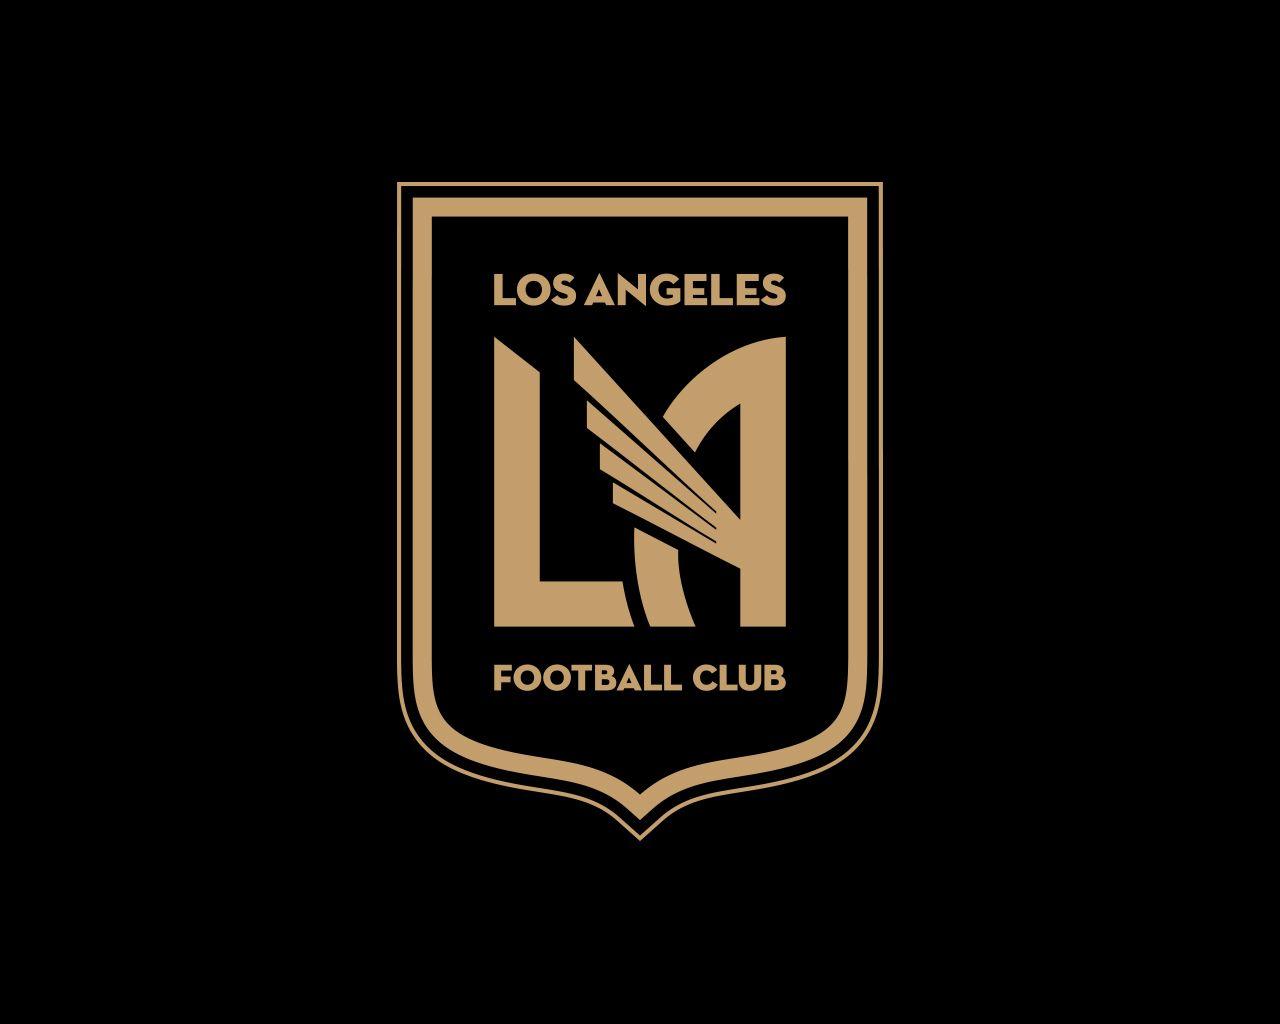 Wallpaper & Background. LAFC Angeles Football Club